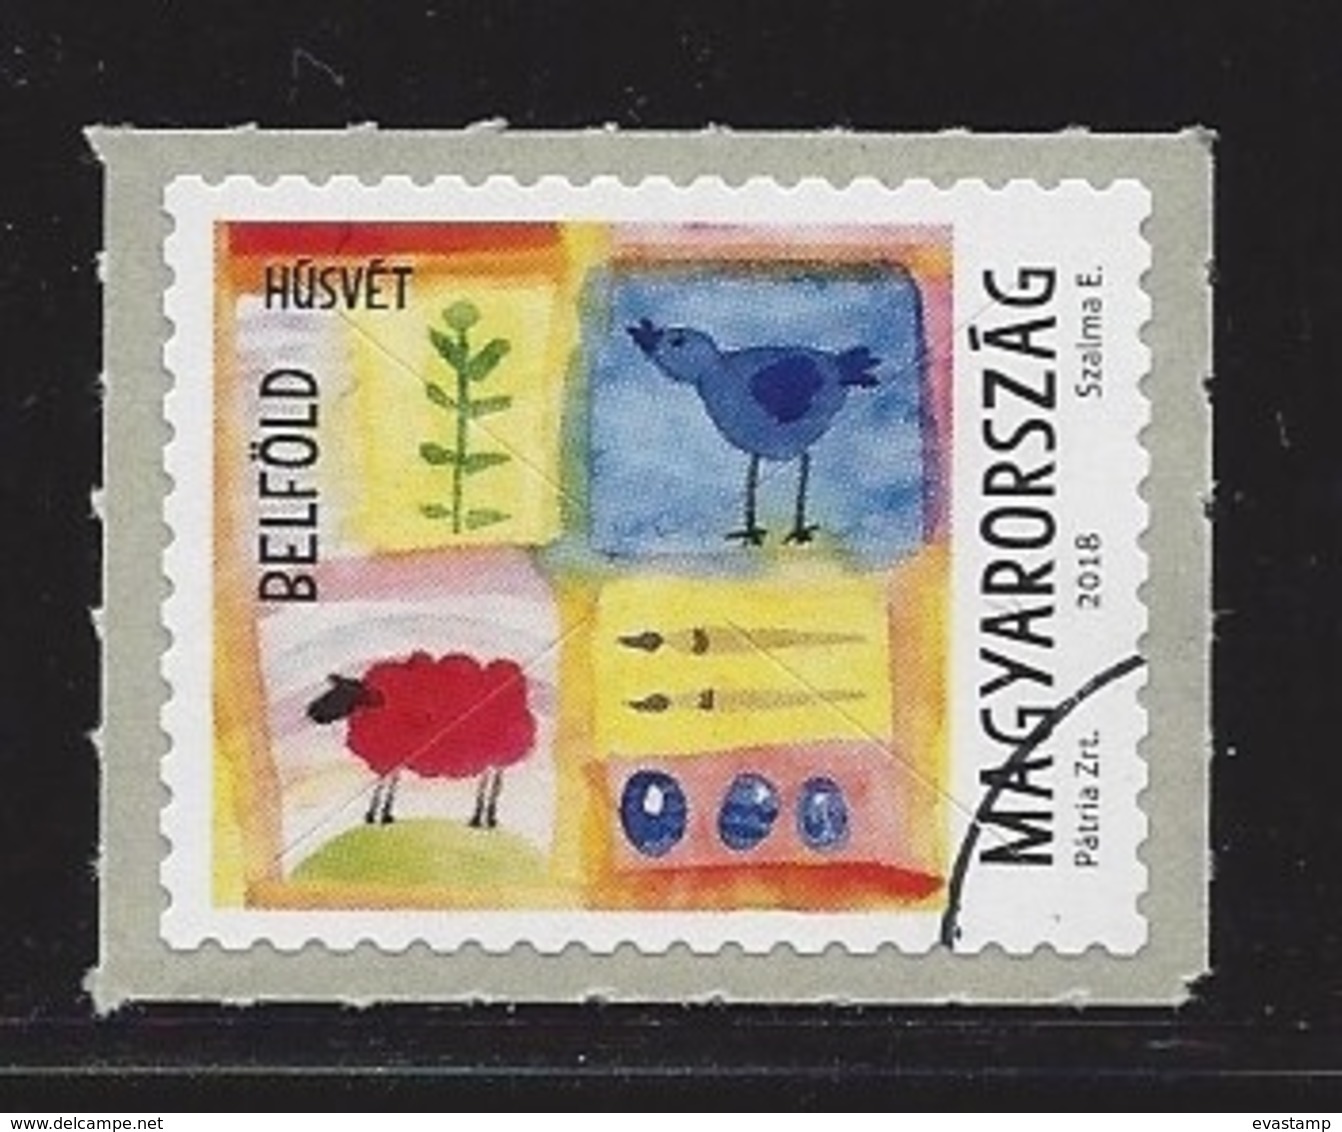 HUNGARY - 2018. Easter / Eggs / Self Adhesive Stamp / Domestic Nominal Value USED!!! - Used Stamps